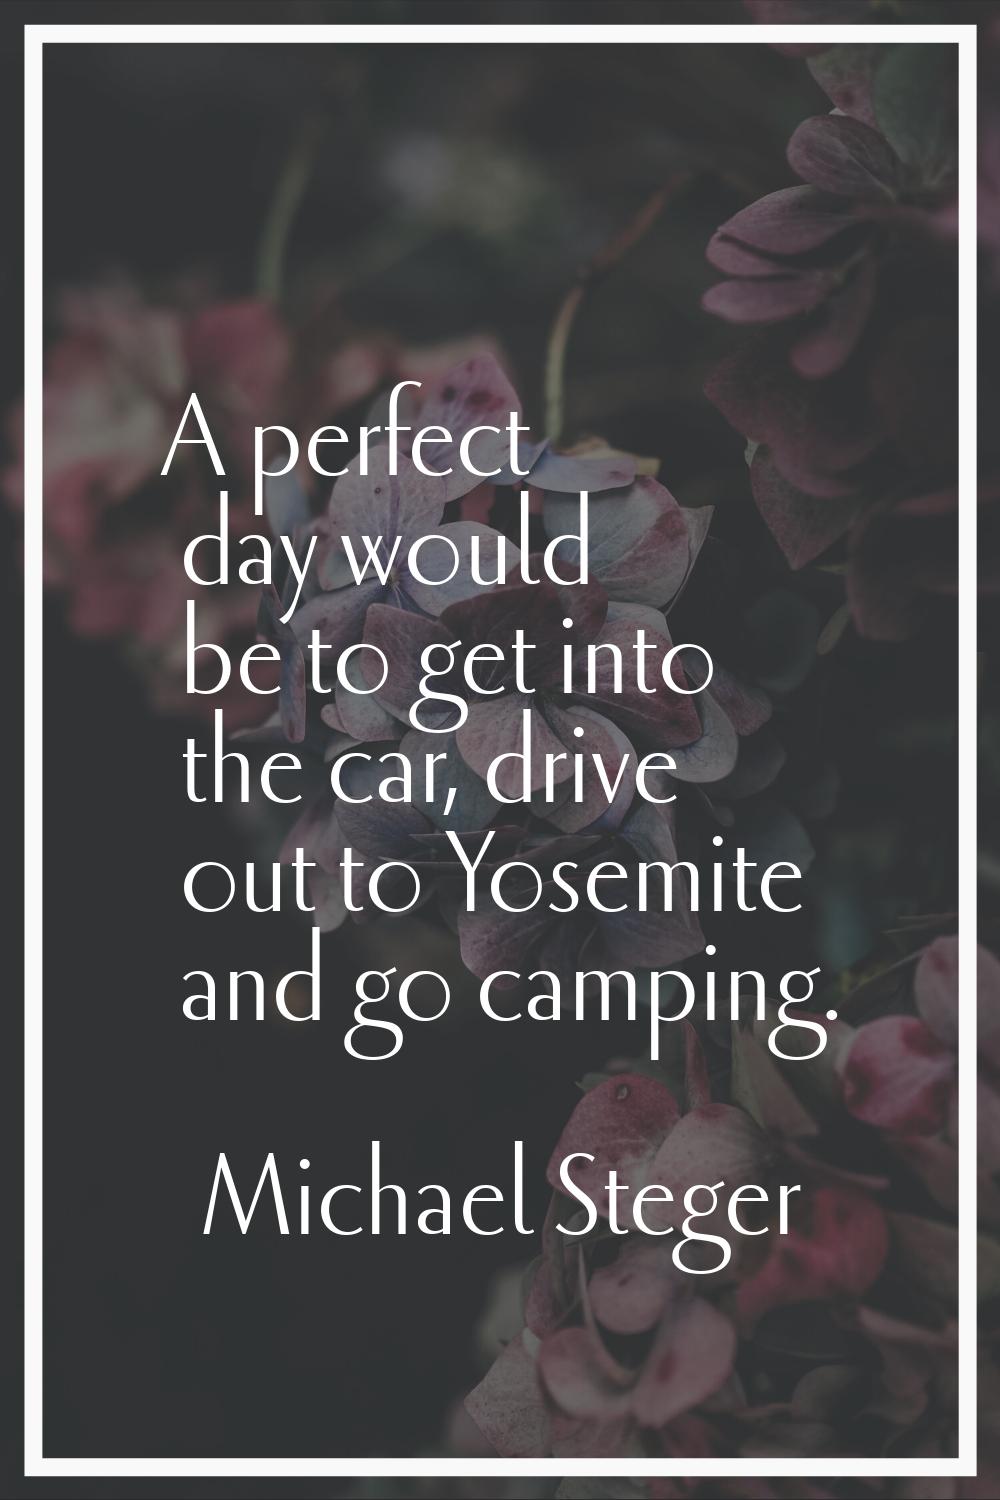 A perfect day would be to get into the car, drive out to Yosemite and go camping.